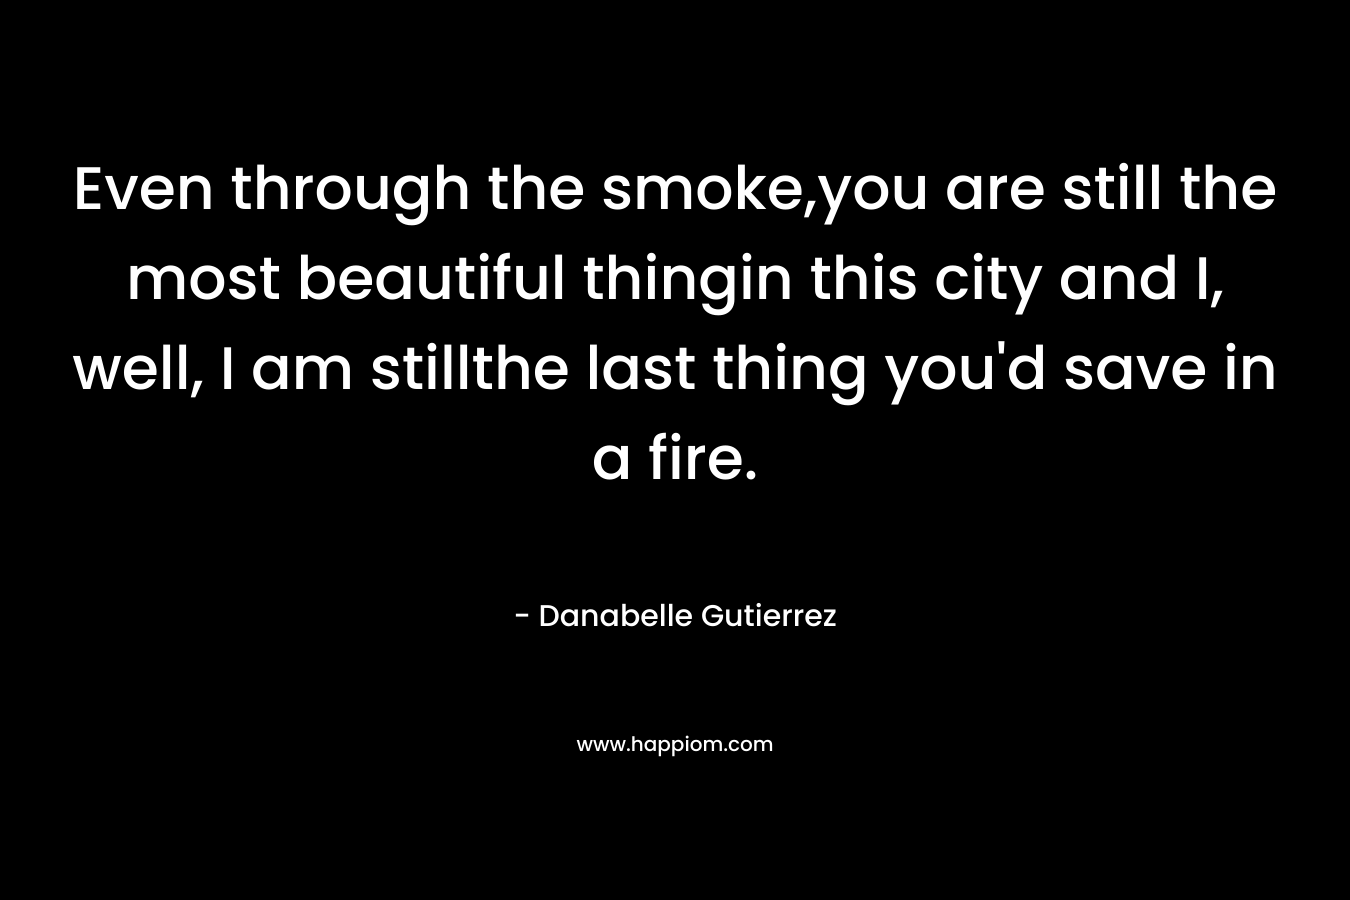 Even through the smoke,you are still the most beautiful thingin this city and I, well, I am stillthe last thing you’d save in a fire. – Danabelle Gutierrez